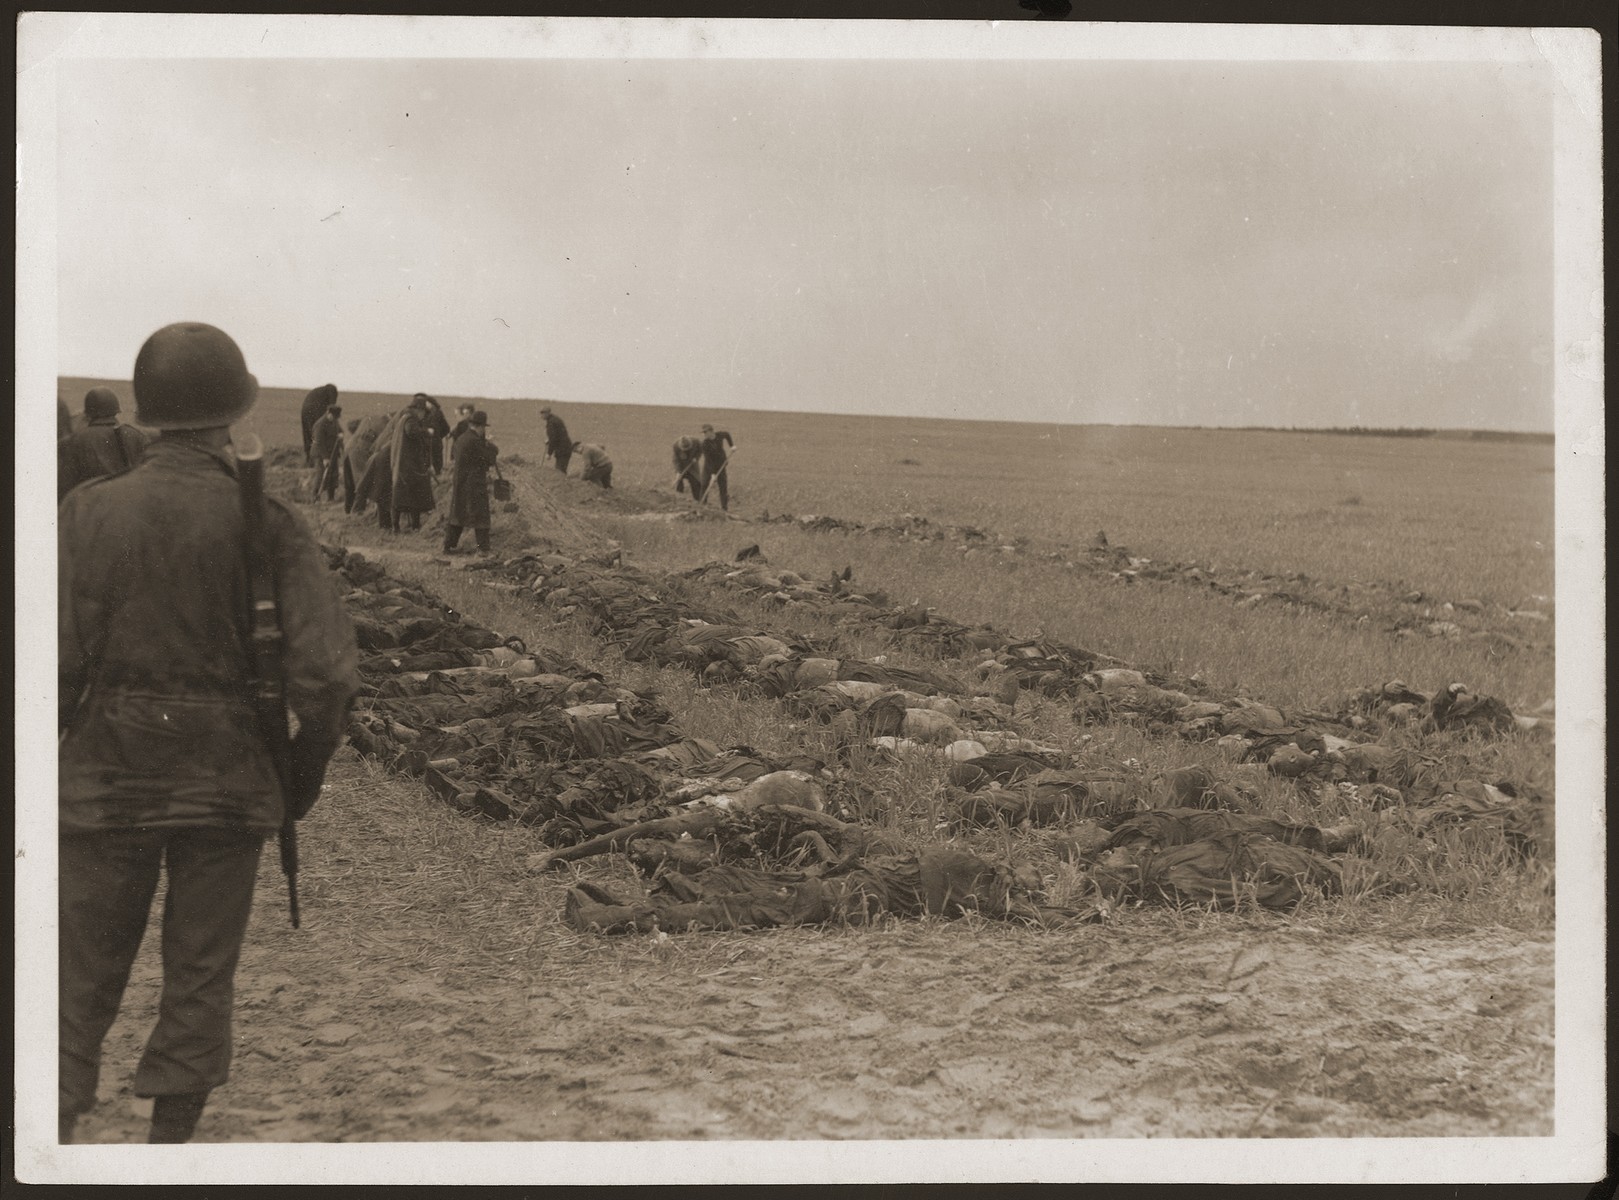 Under the supervision of American soldiers, German civilians from Gardelegen dig graves for the bodies of prisoners killed by the SS in a barn just outside the town.